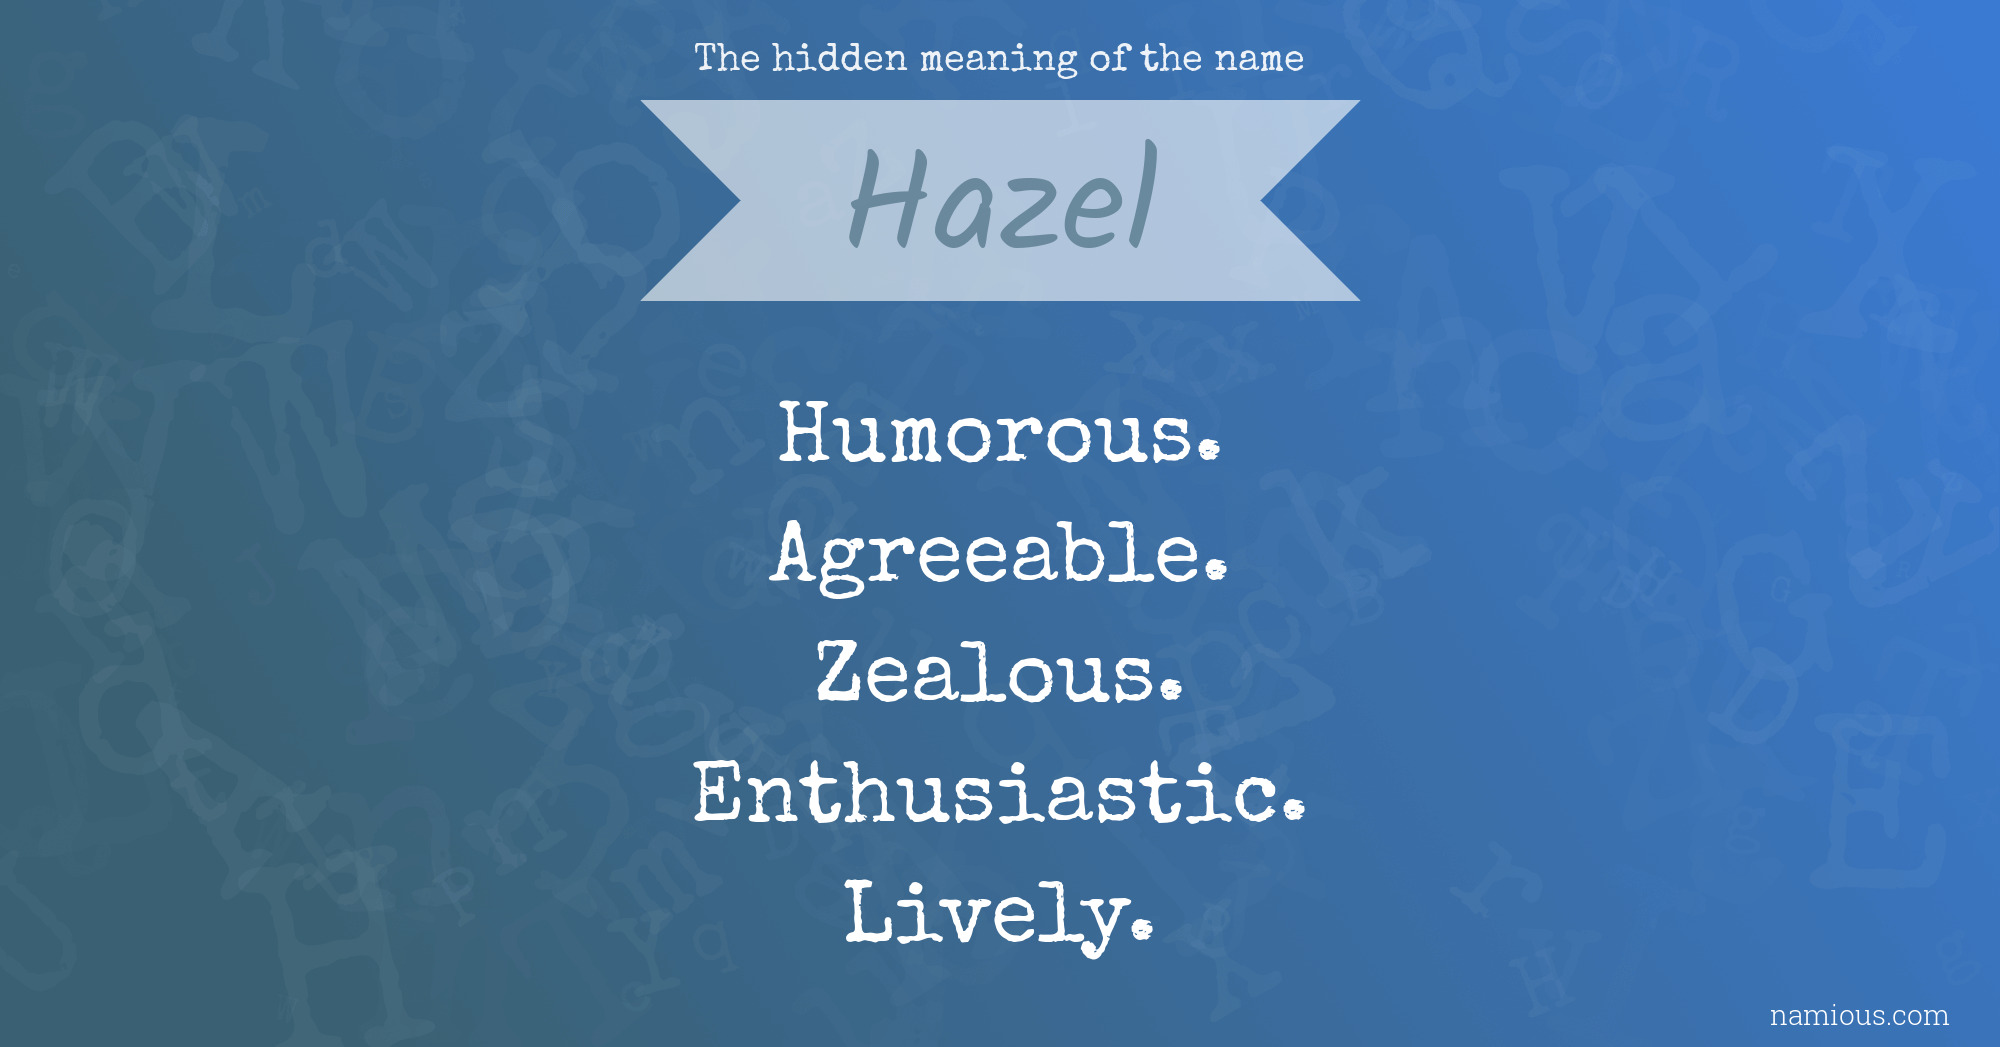 The hidden meaning of the name Hazel